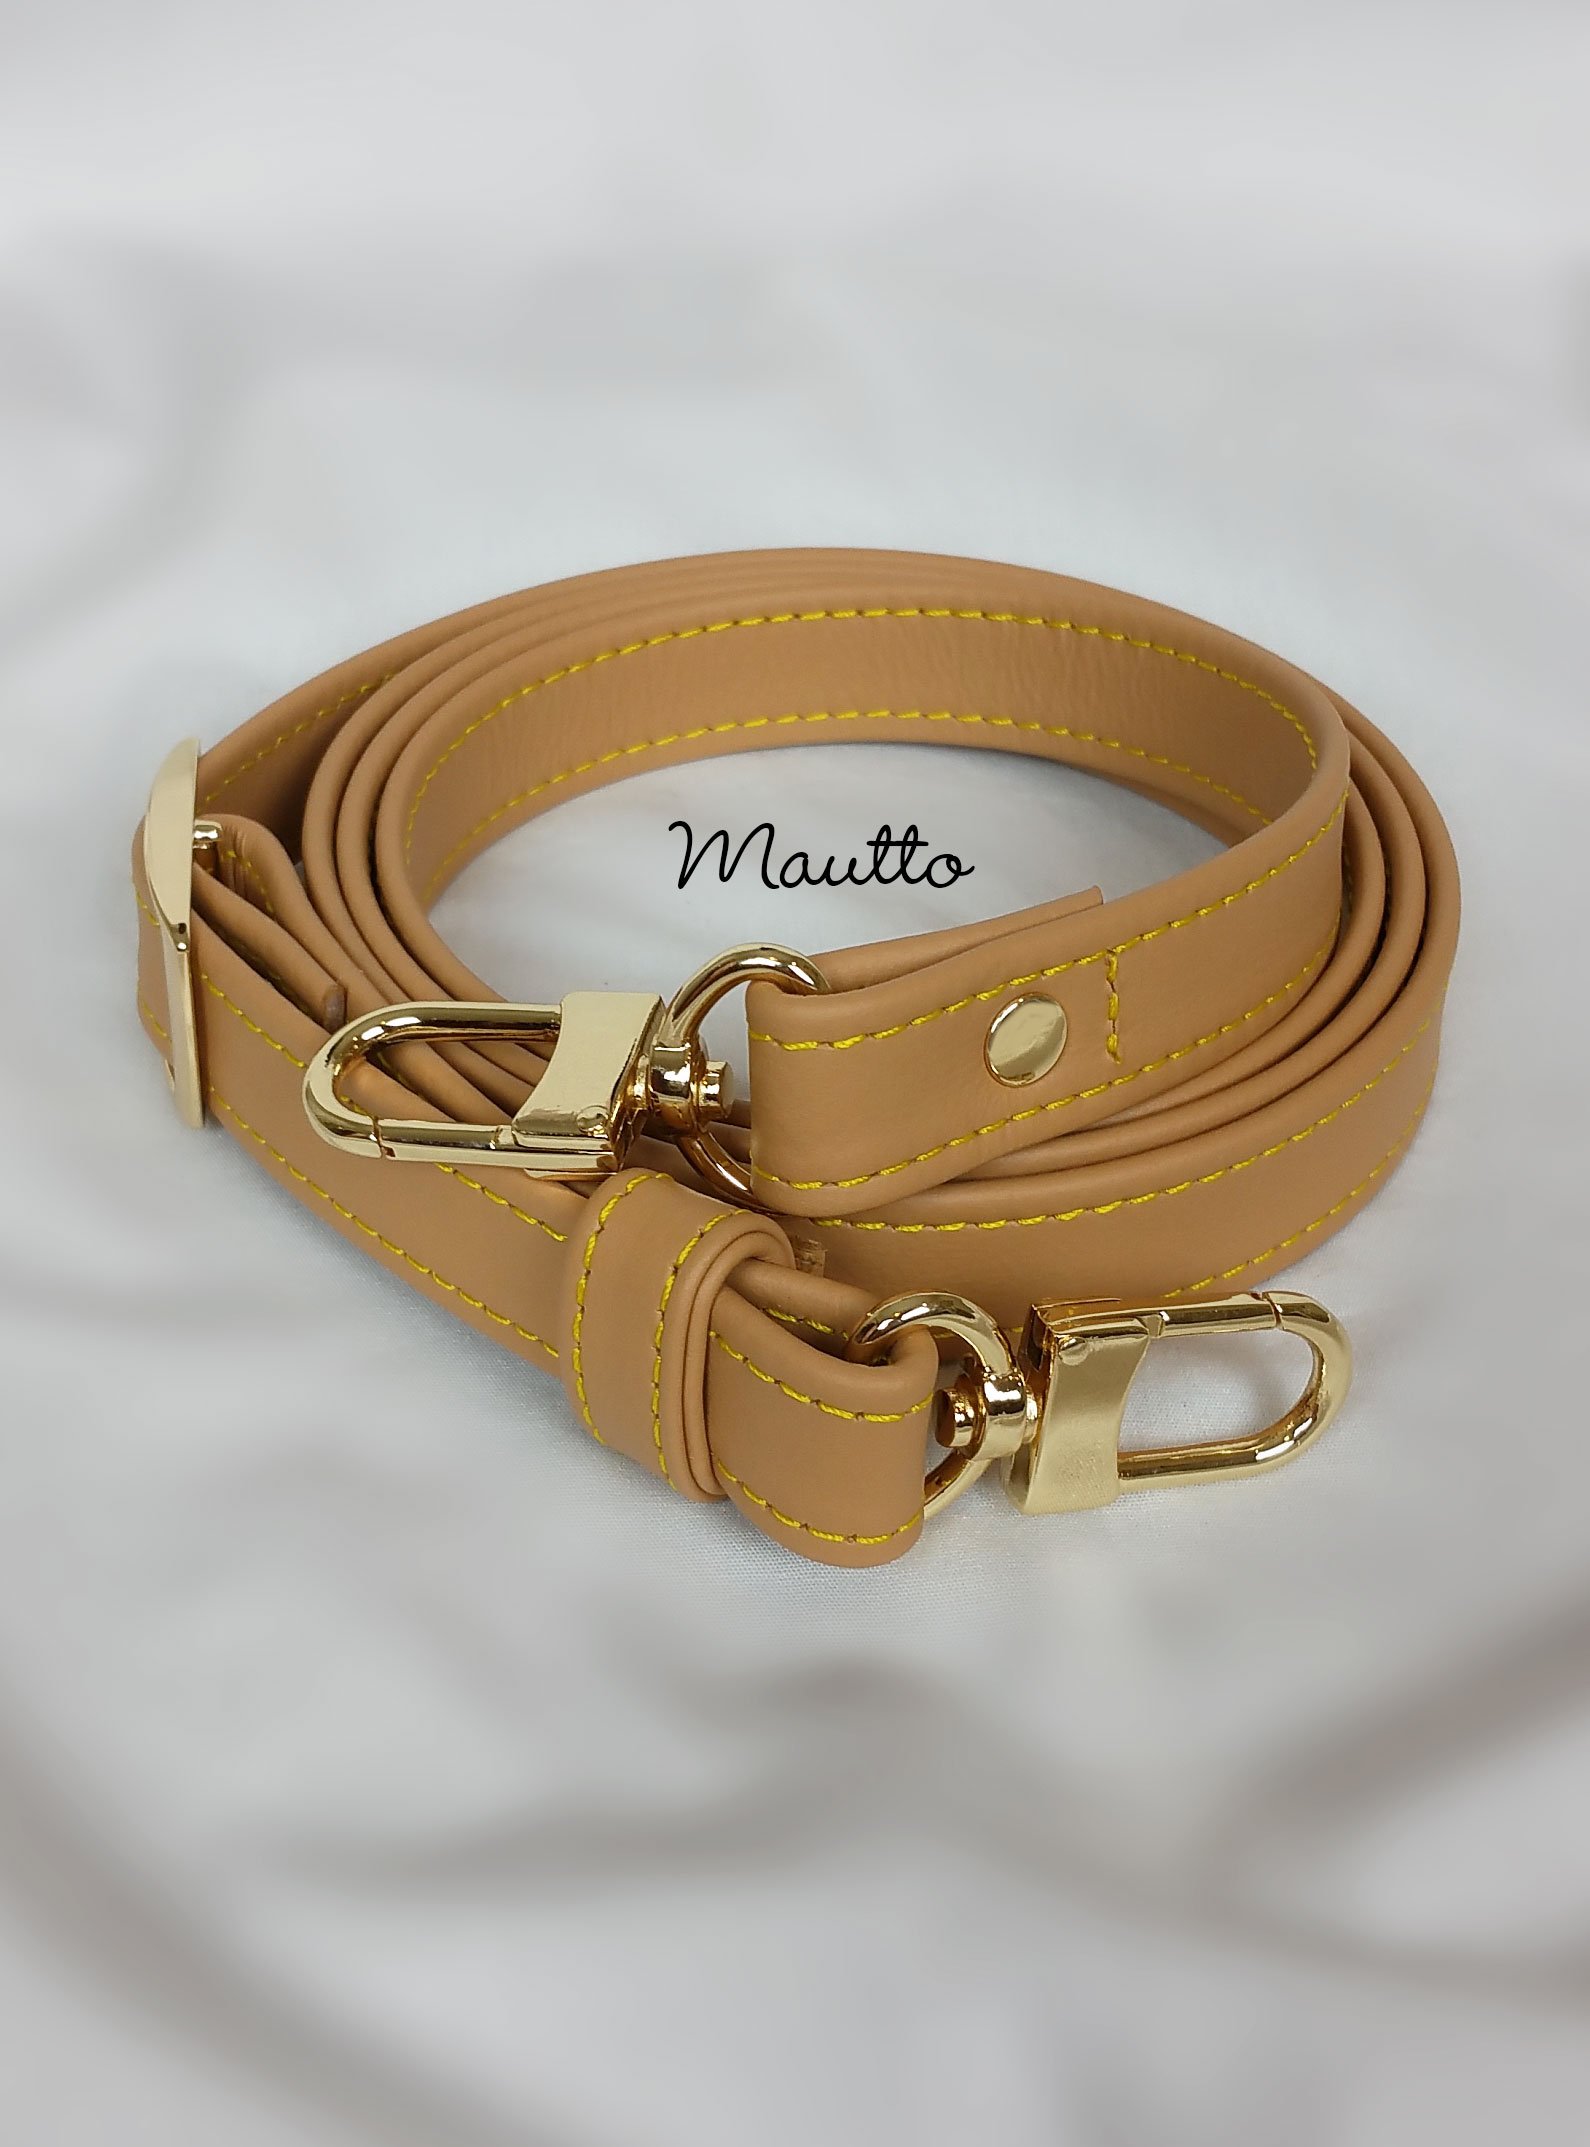 Light Tan Leather Strap with Yellow Stitching for Louis Vuitton (LV), Coach  & More - .75 Wide